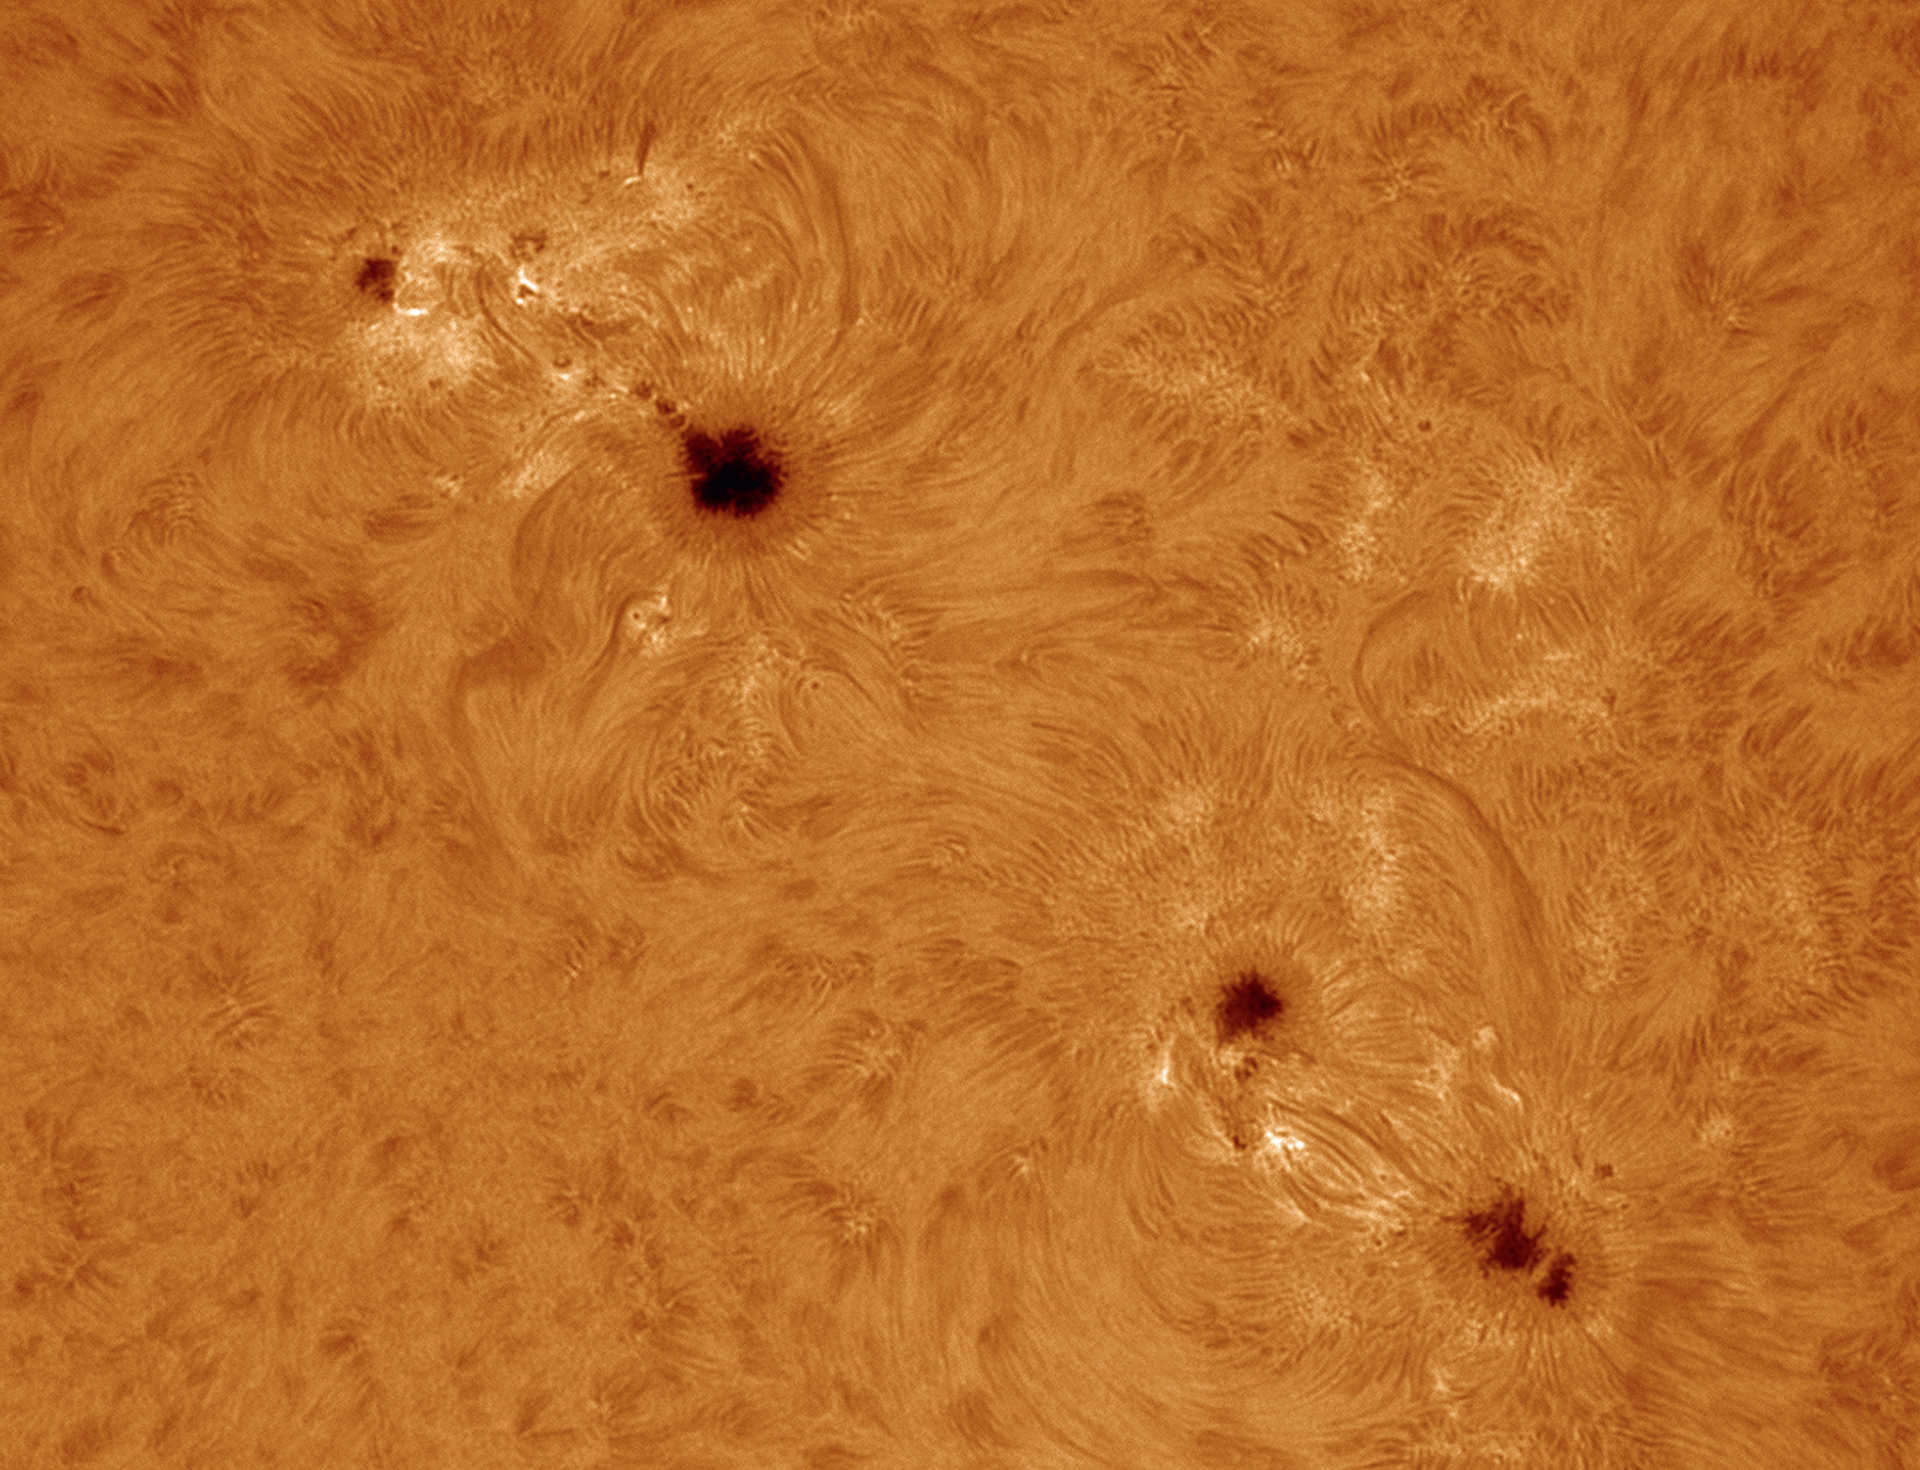 Sunspots in Hα light. Created with a Coronado Solarmax90 filter on a refractor with a 2000mm focal length, aperture: 90mm; uncooled CCD camera; 500 of 2500 frames processed in AviStack2 and Photoshop. U. Dittler